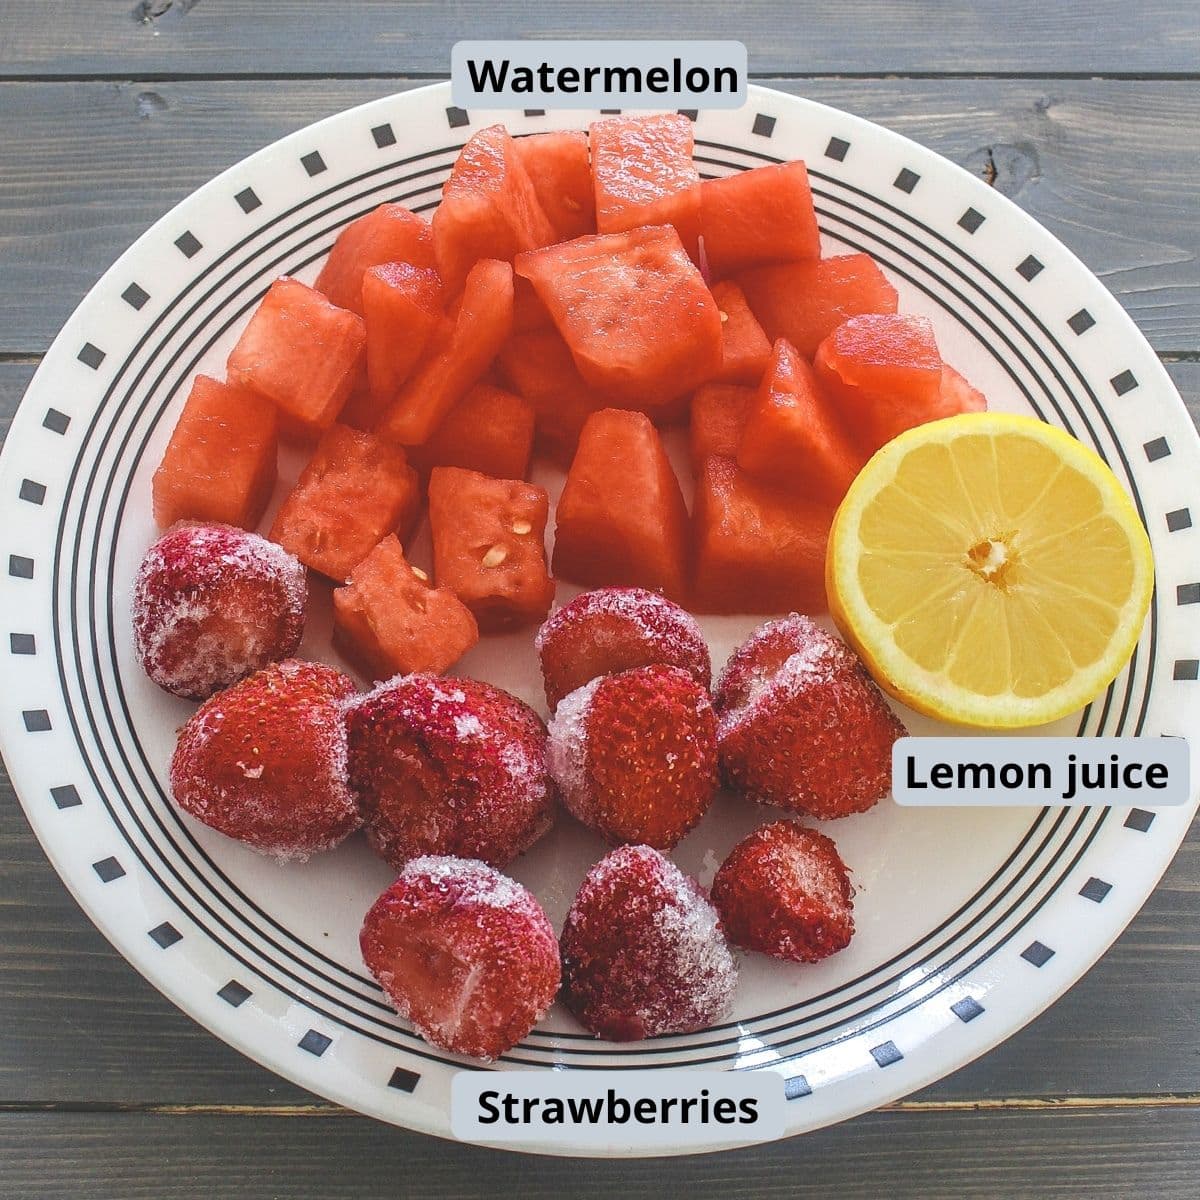 Frozen strawberries, watermelon cubes and half lemon in a plate.